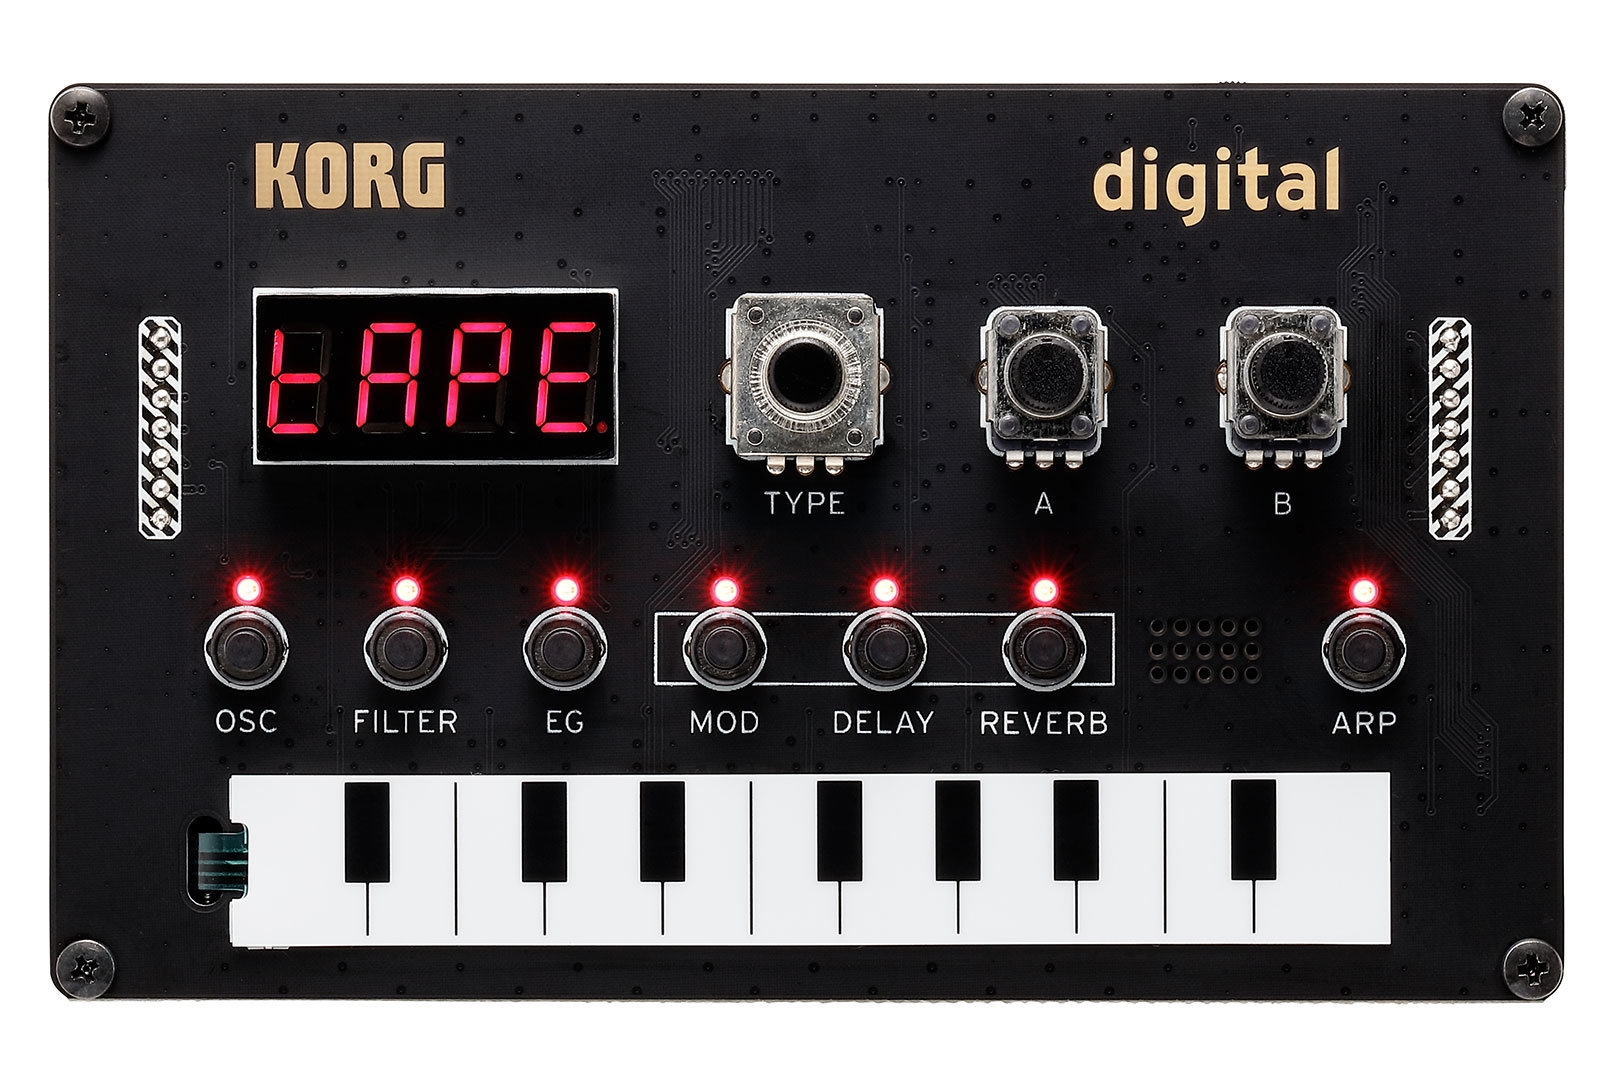 Korg launches a line of DIY music gear with a $100 synth | DeviceDaily.com